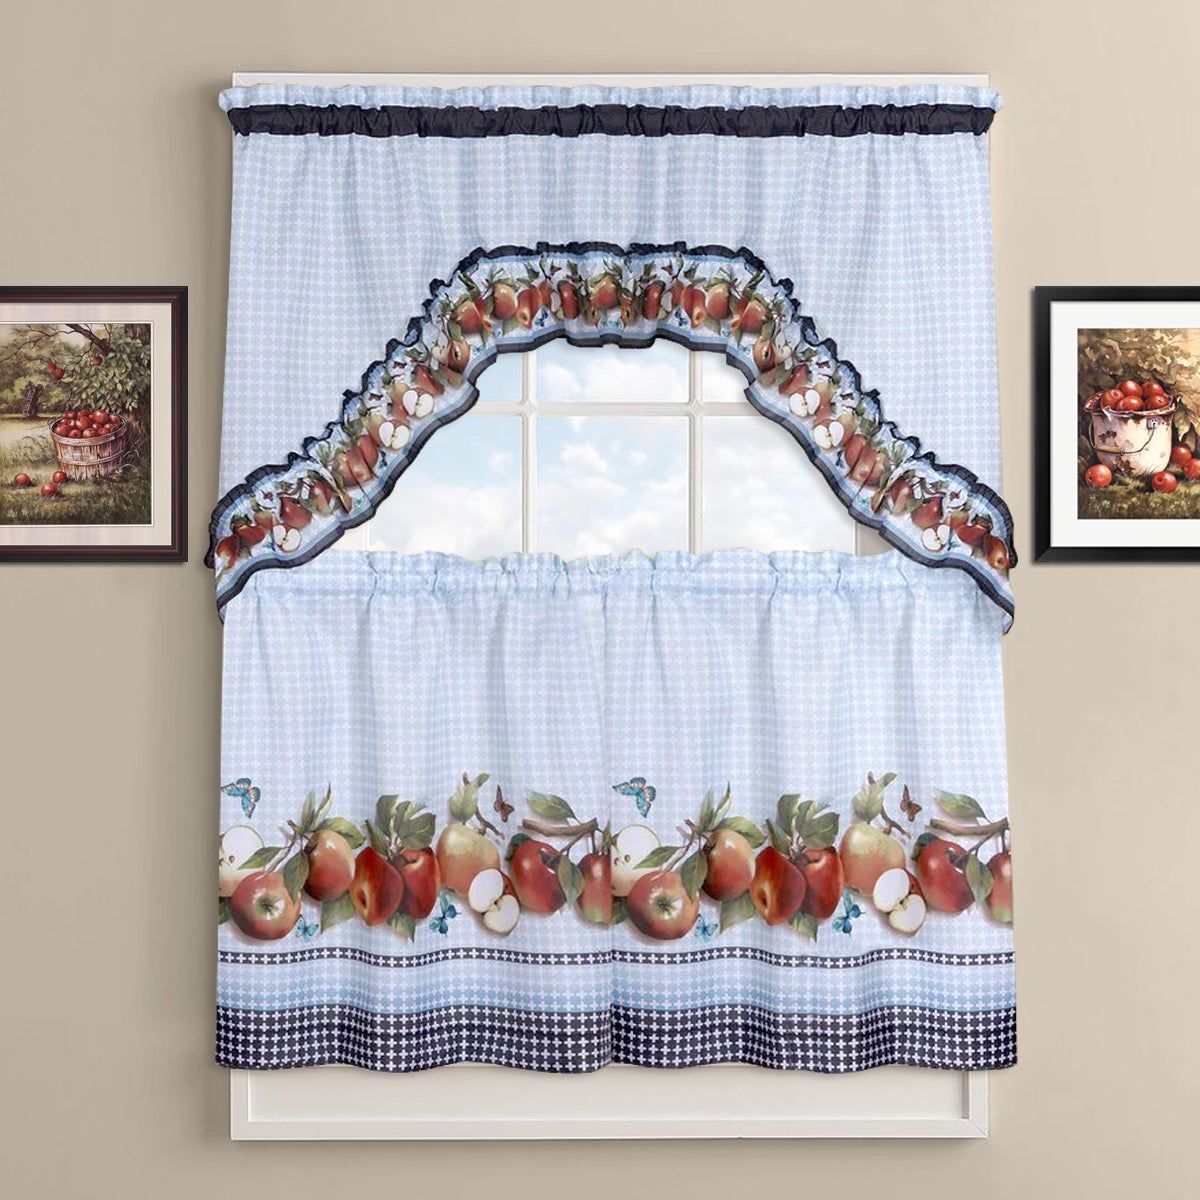 Delicious Apples Kitchen Curtain Tier And Valance Set With Red Delicious Apple 3 Piece Curtain Tiers (Photo 4 of 20)